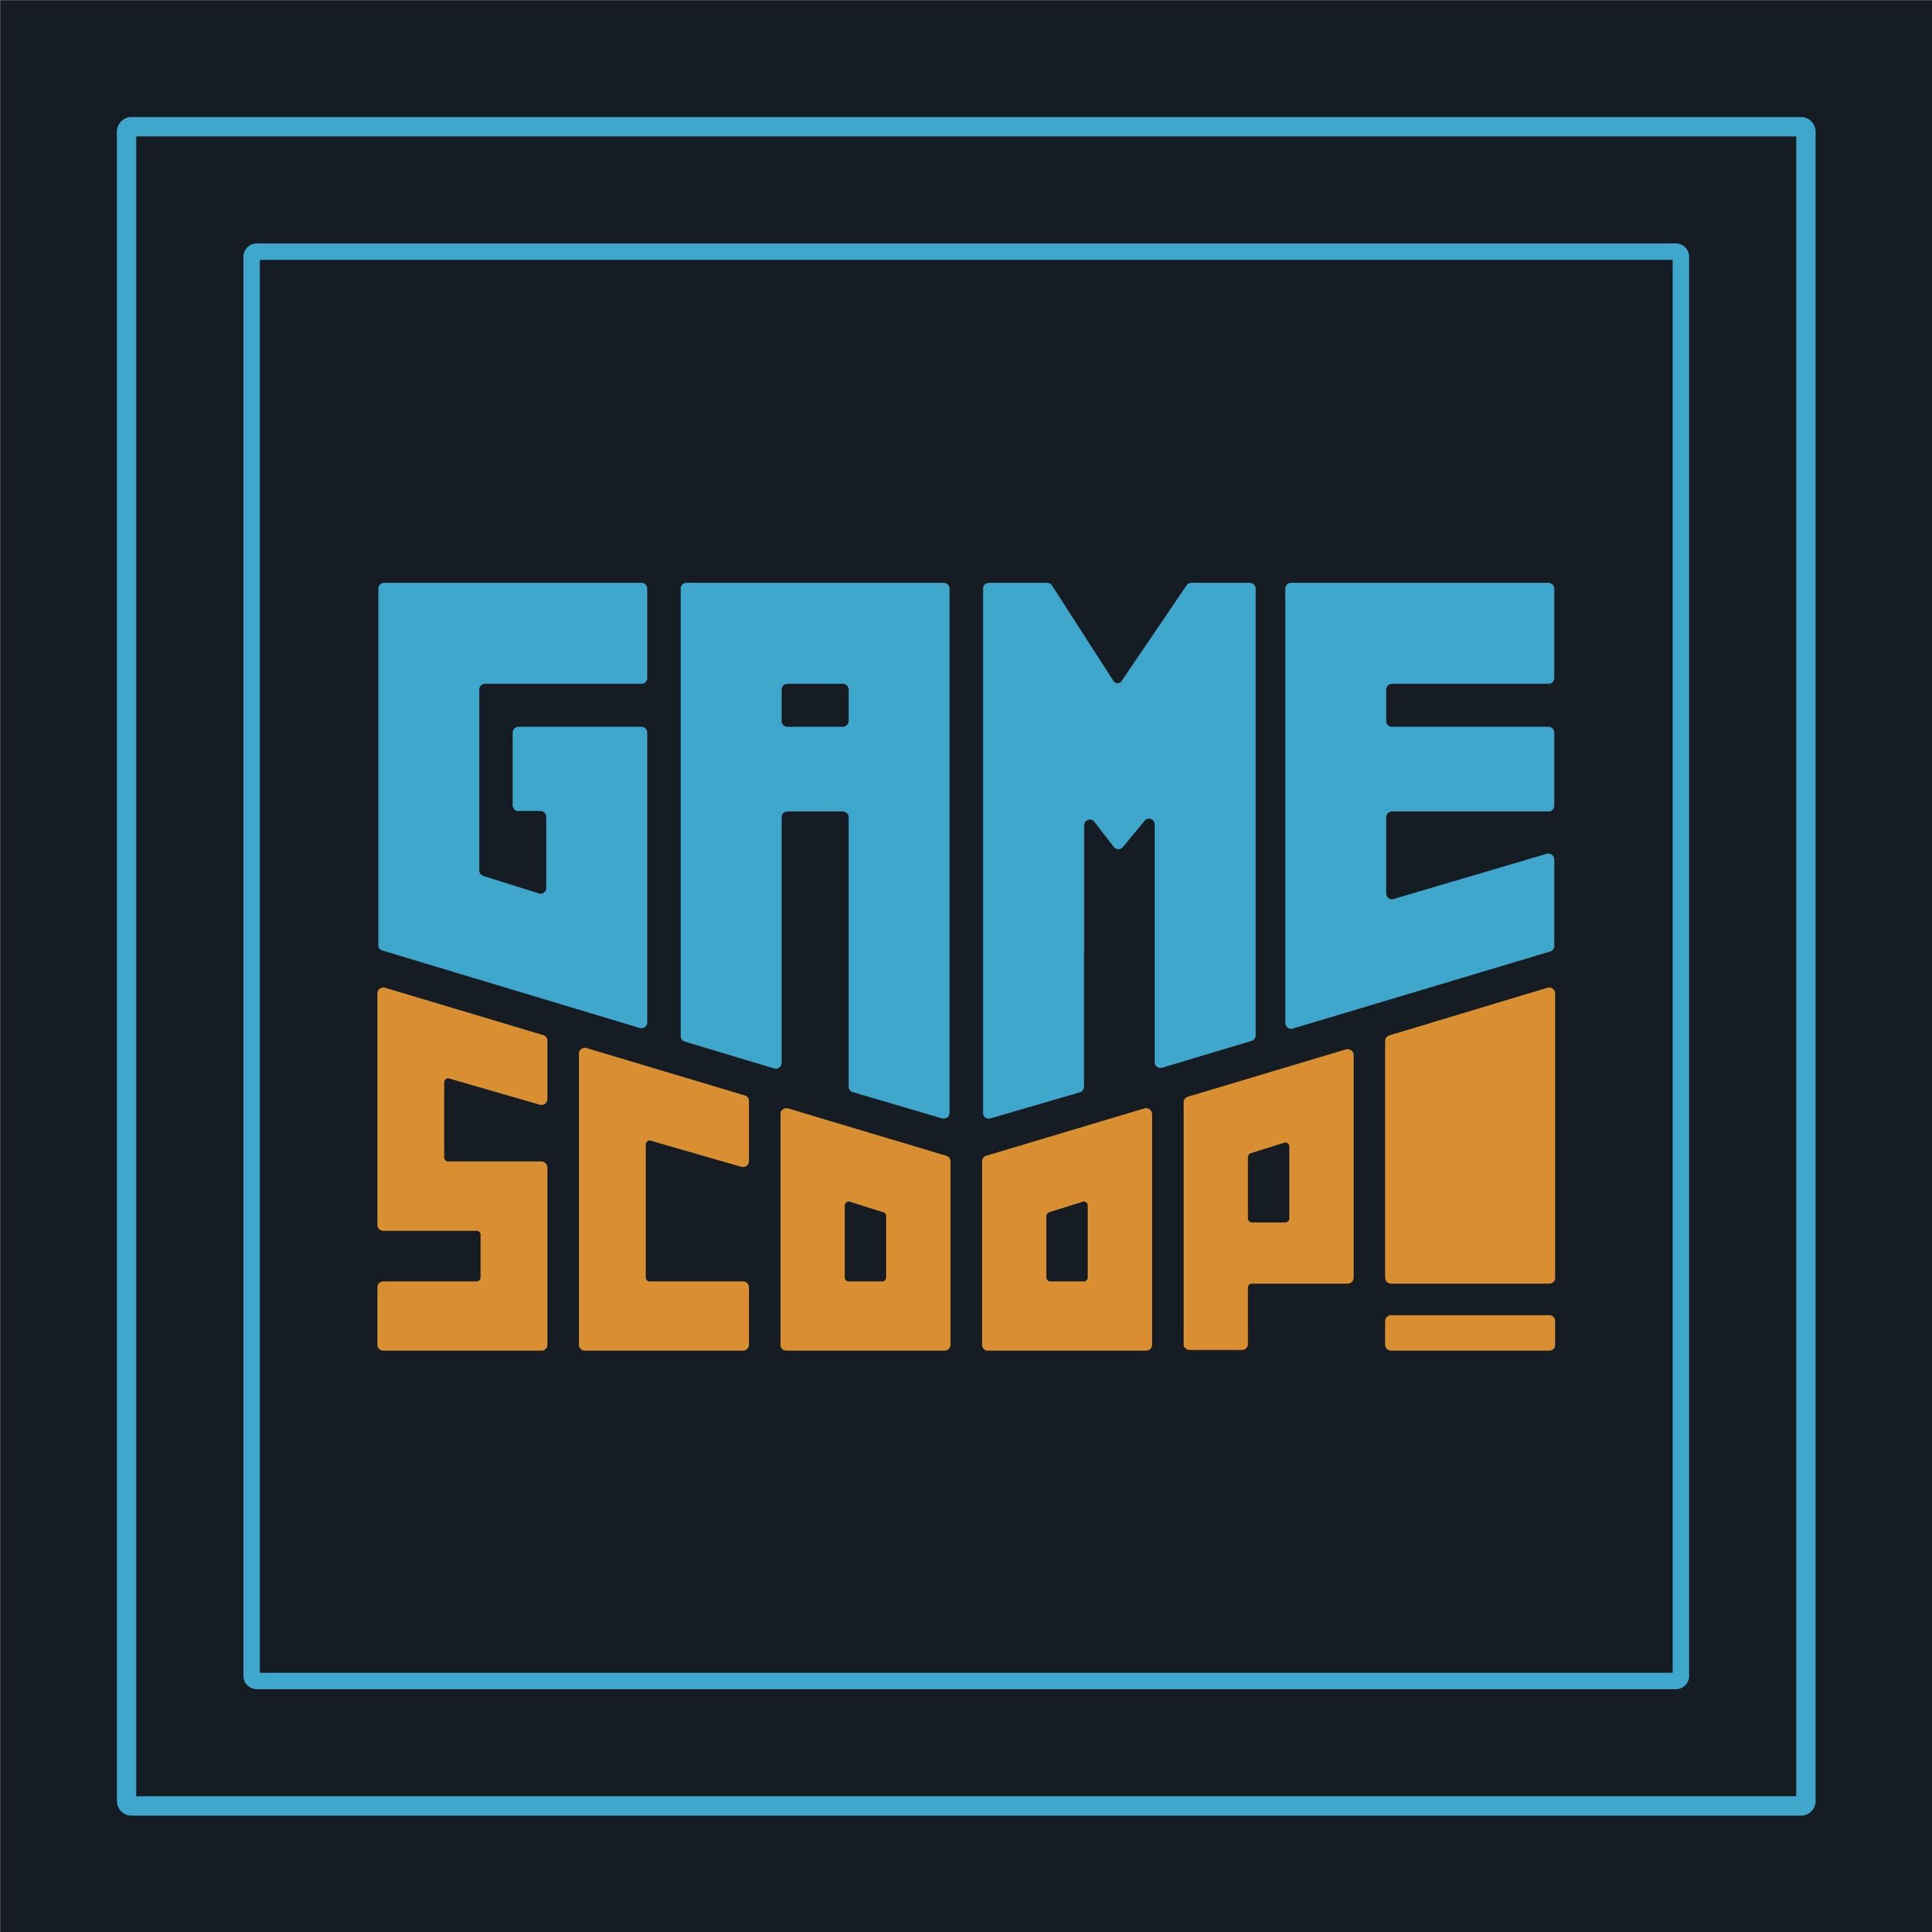 Best Kinda Funny Games Daily: Video Games News Podcast Podcasts